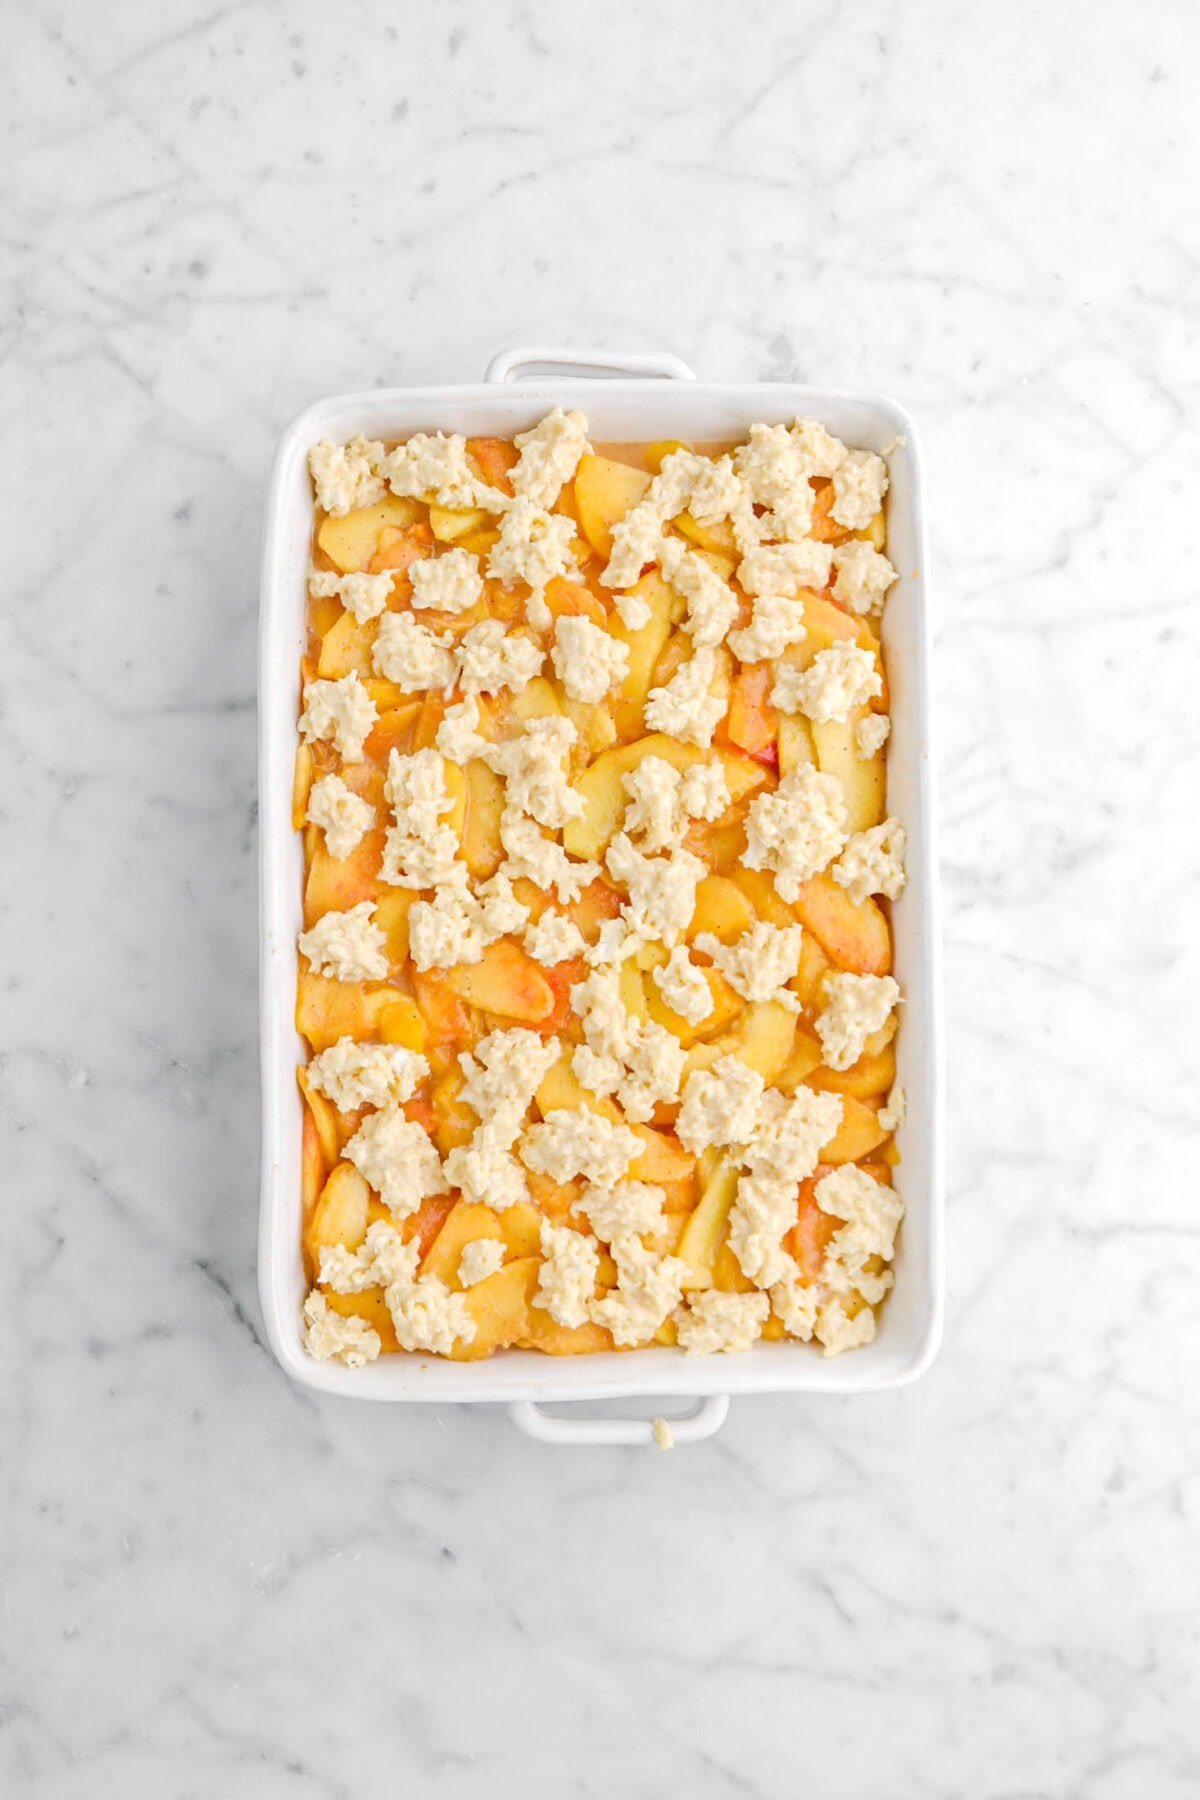 crumbled dough on top of peach filling in glass casserole